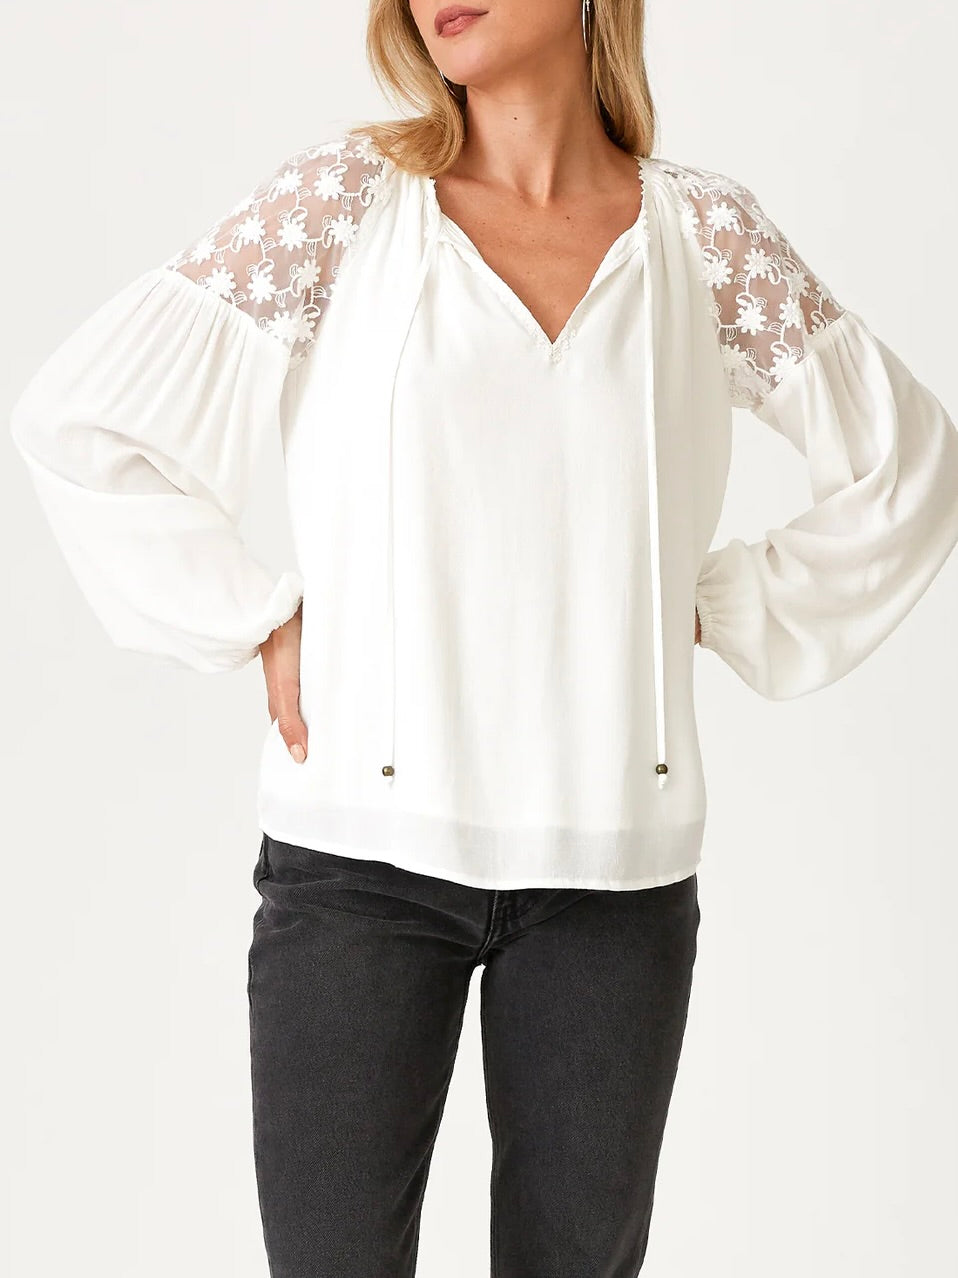 Long Sleeve Top with Lace Shoulder Detail - White FINAL SALE